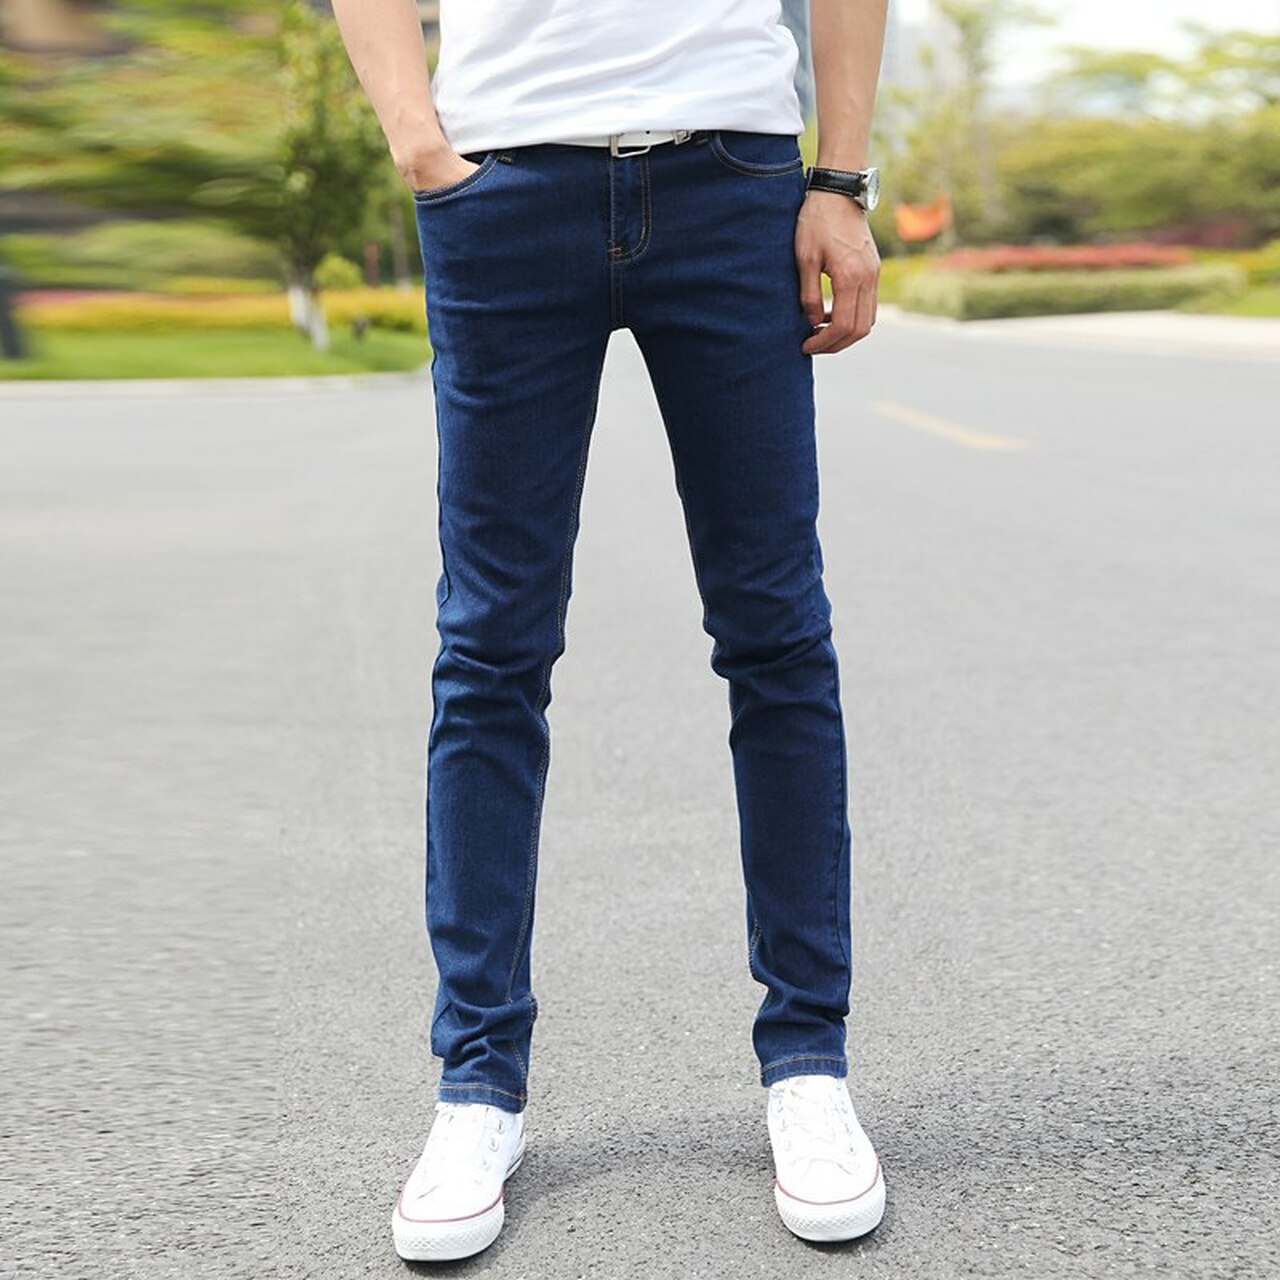 Mens Slim Fit jeans Men Stretch Fashion Skinny Jeans Trousers Male Super  Elastic Casual Straight Blue Black Denim Jeans Youth - OnshopDeals.Com